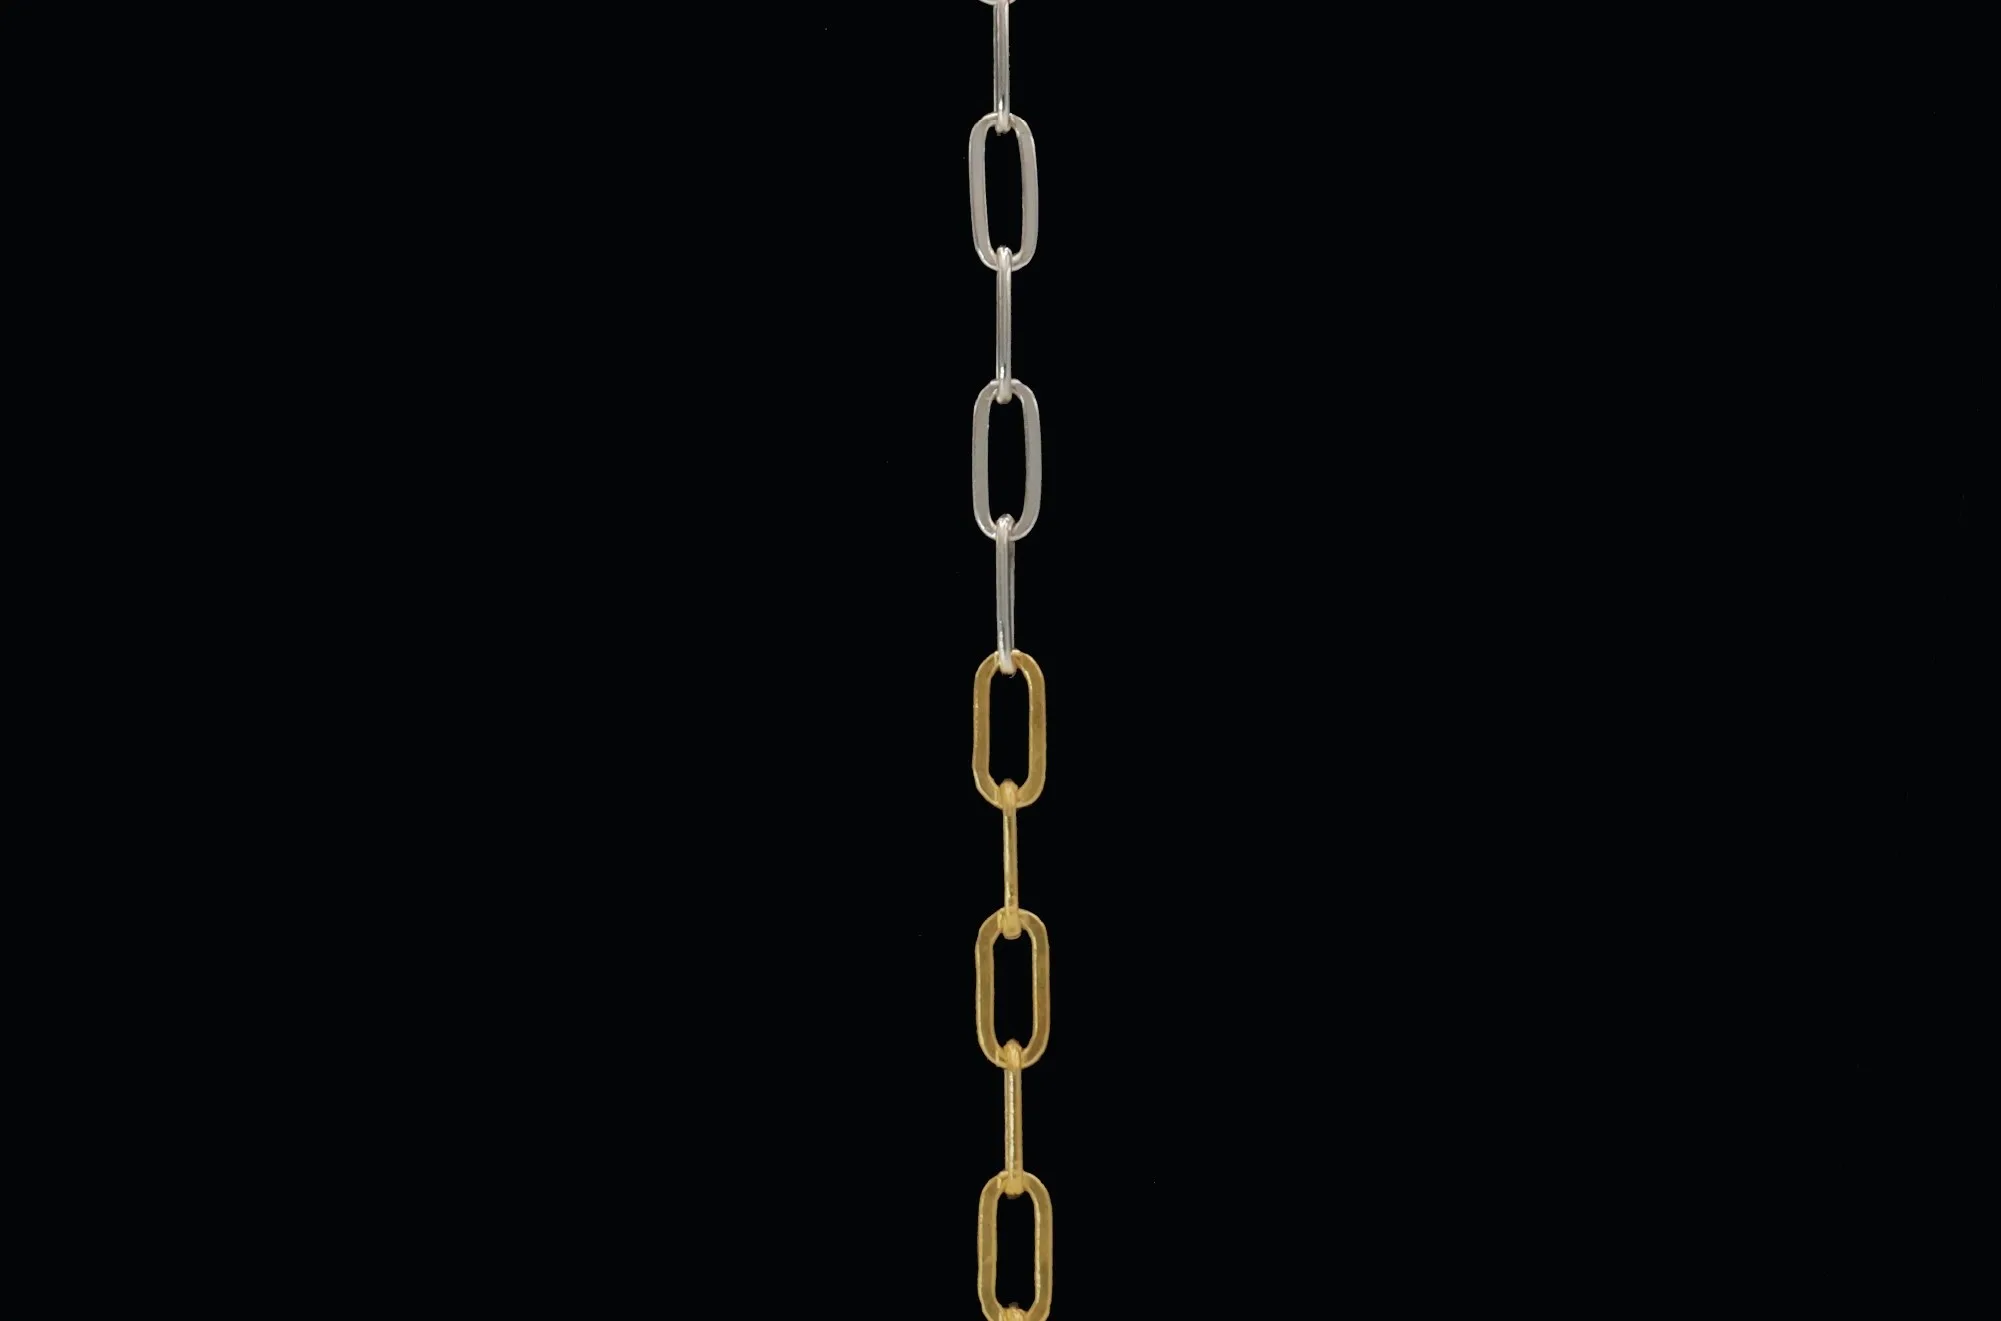 Mixed metals - gold and silver chain